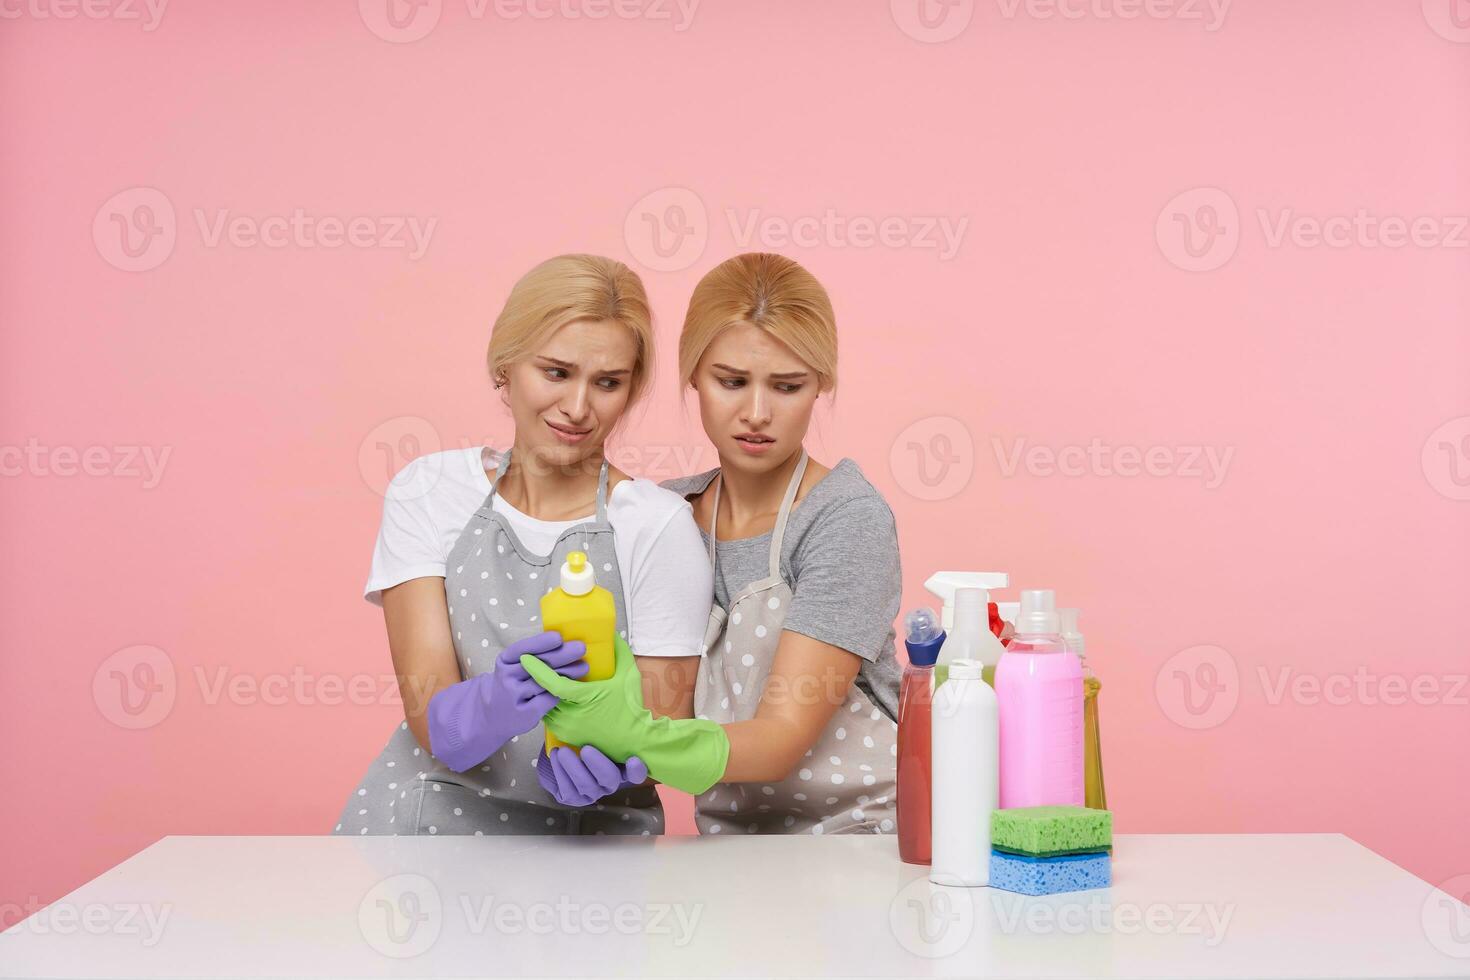 Confused young blonde women with natural makeup frowning their faces while holding bottle of detergent, sitting over pink background in basic t-shirts and aprons with dots photo